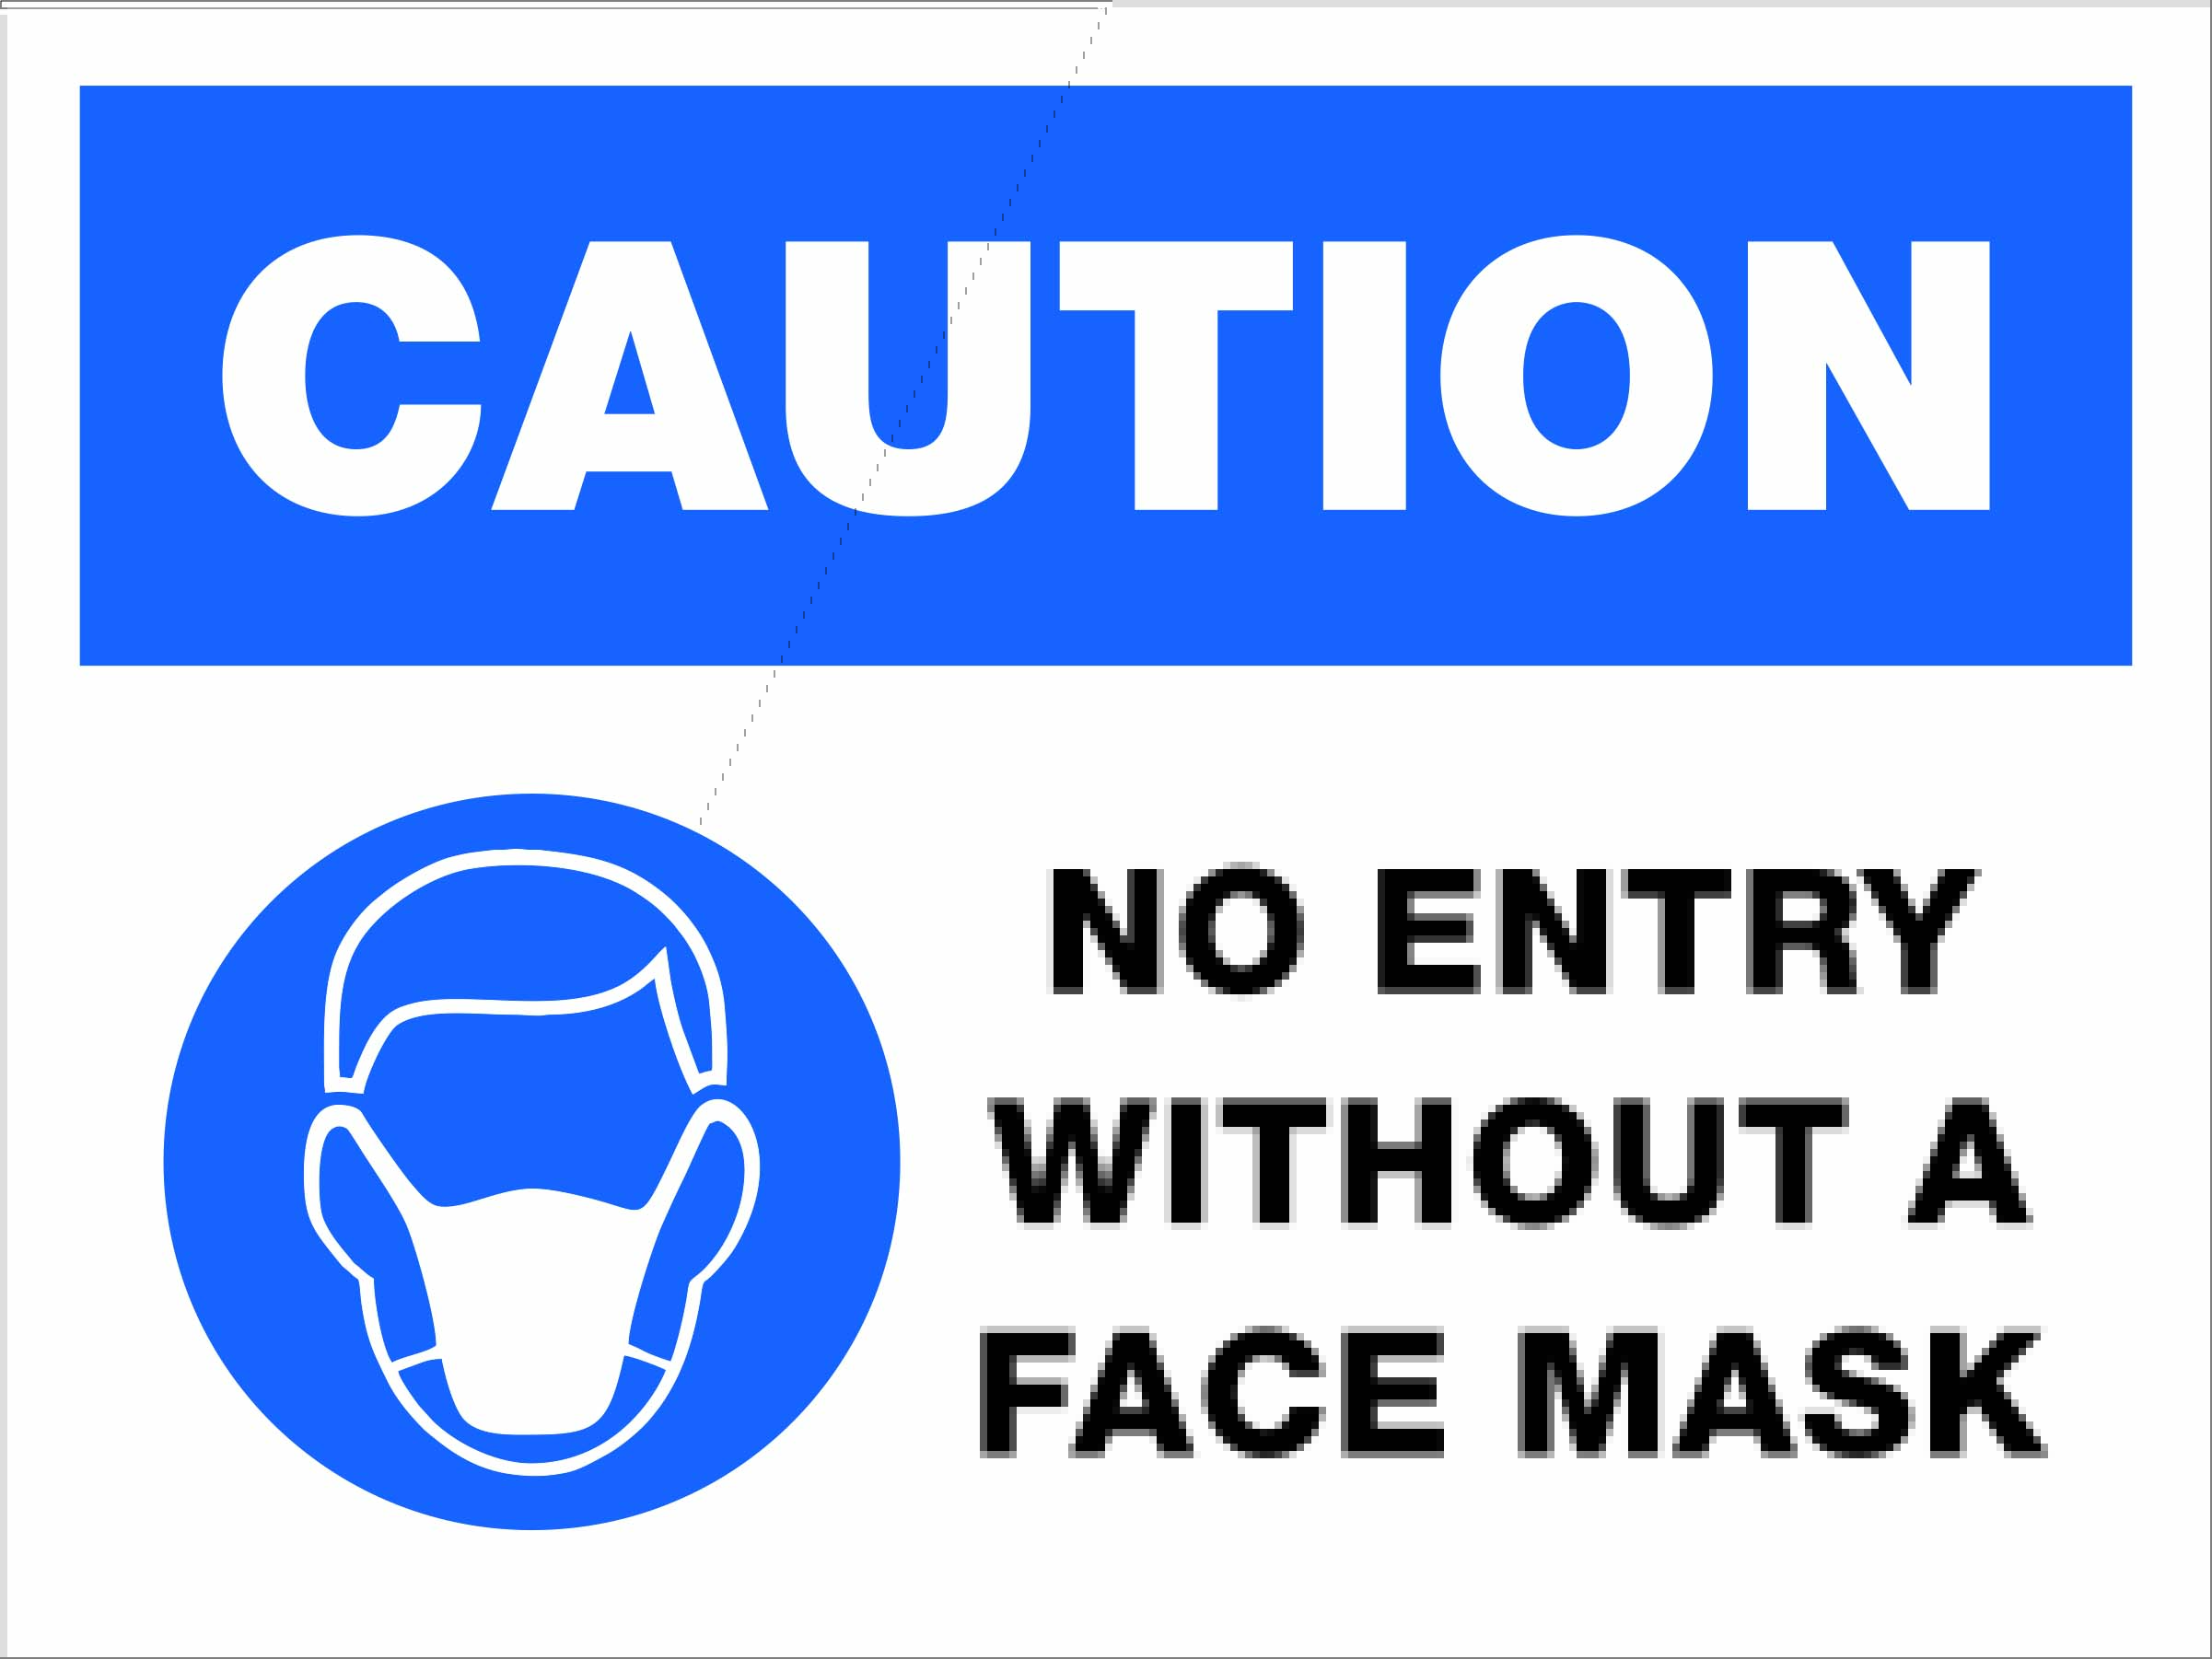 SOA - No Entry Without Face Mask 6" x 8" Decal - 4 pack